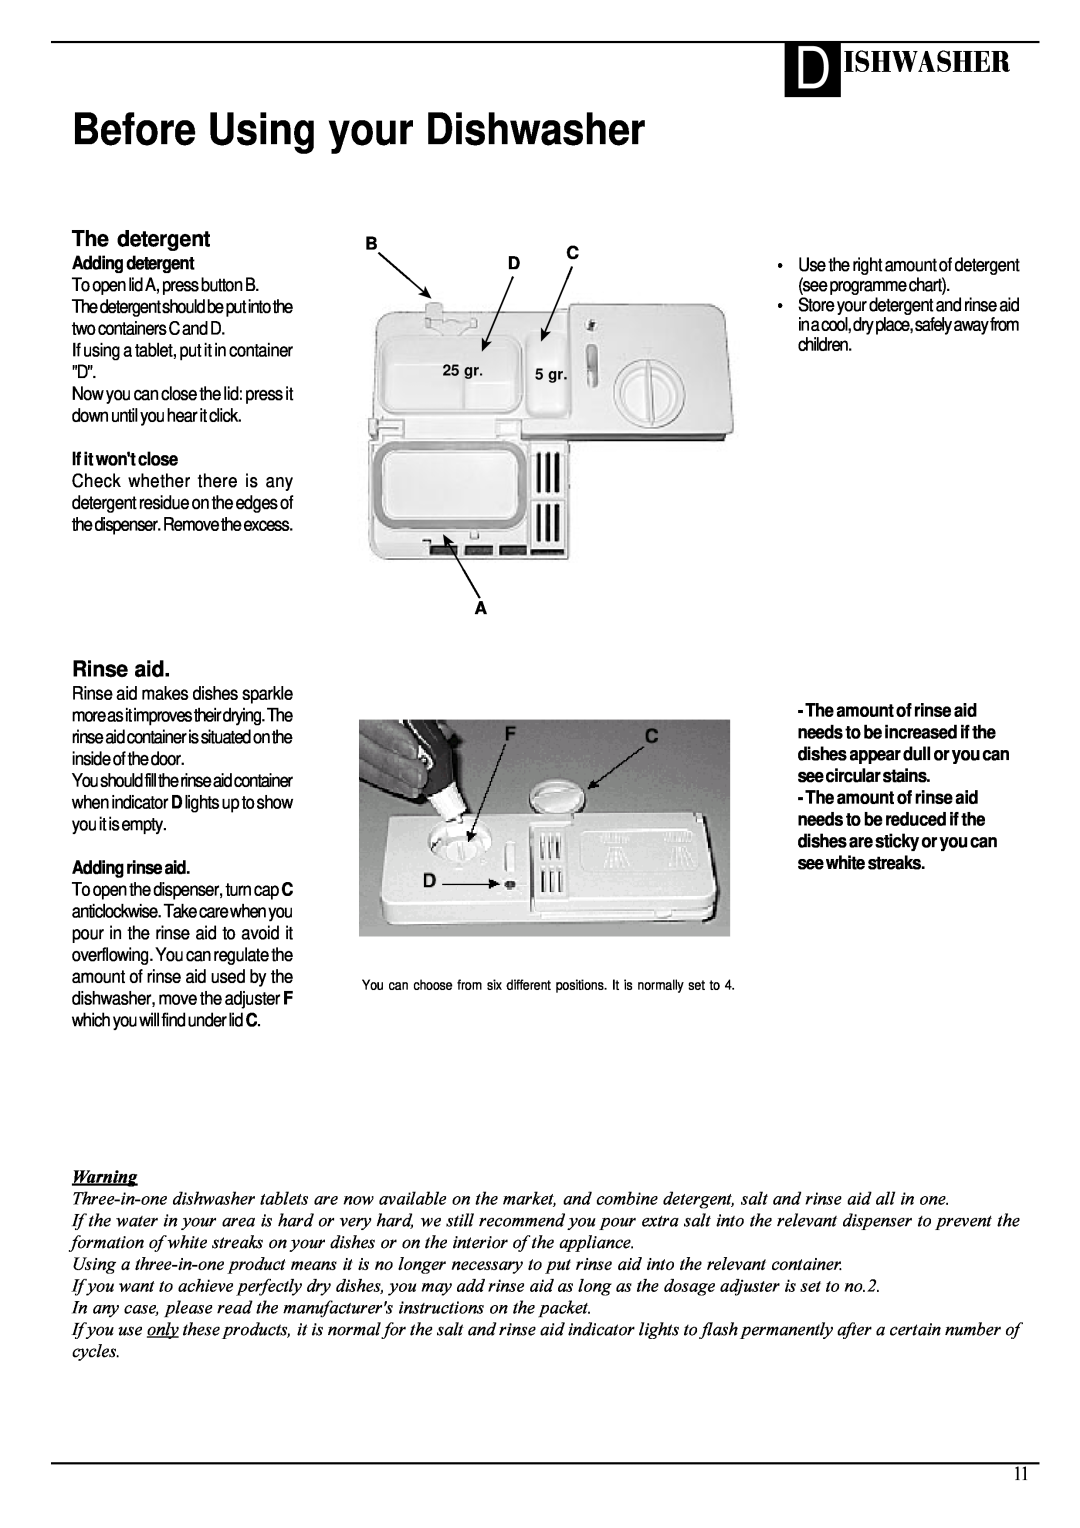 Hotpoint Aquarius FDW20 manual Before Using your Dishwasher, D Ishwasher, The detergent, Rinse aid, Adding detergent 